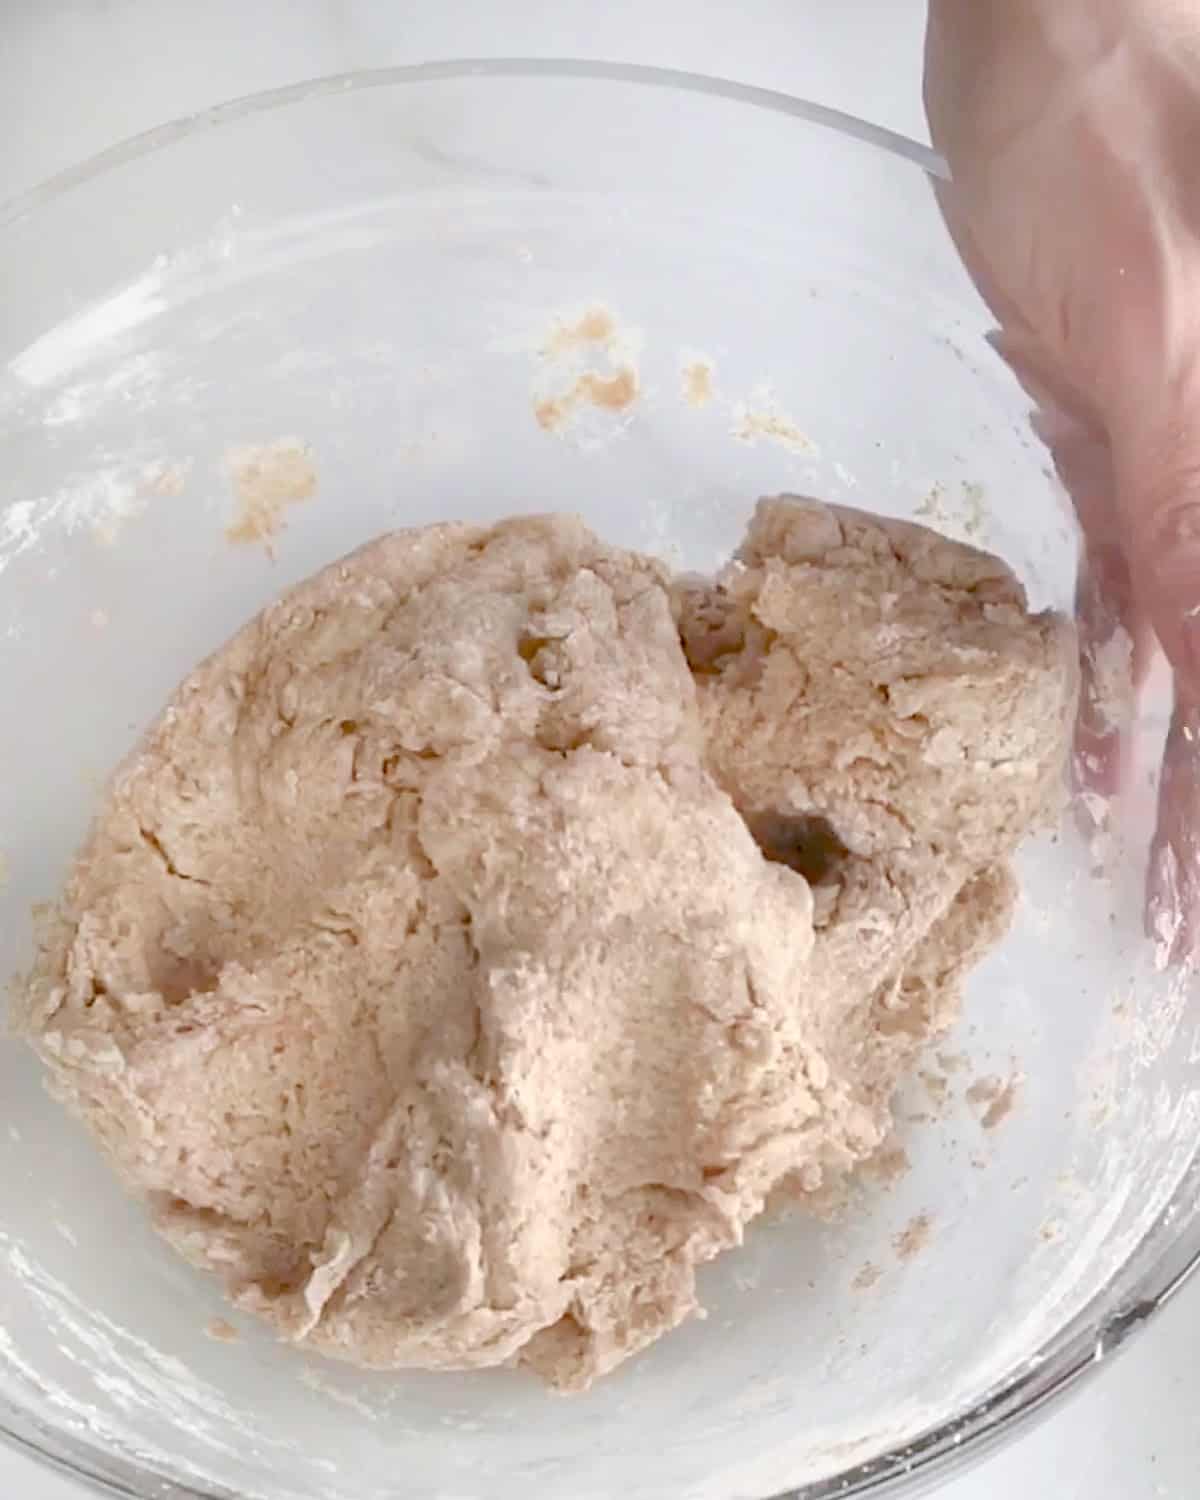 Stiff whole wheat bread dough in a glass bowl on a white surface.